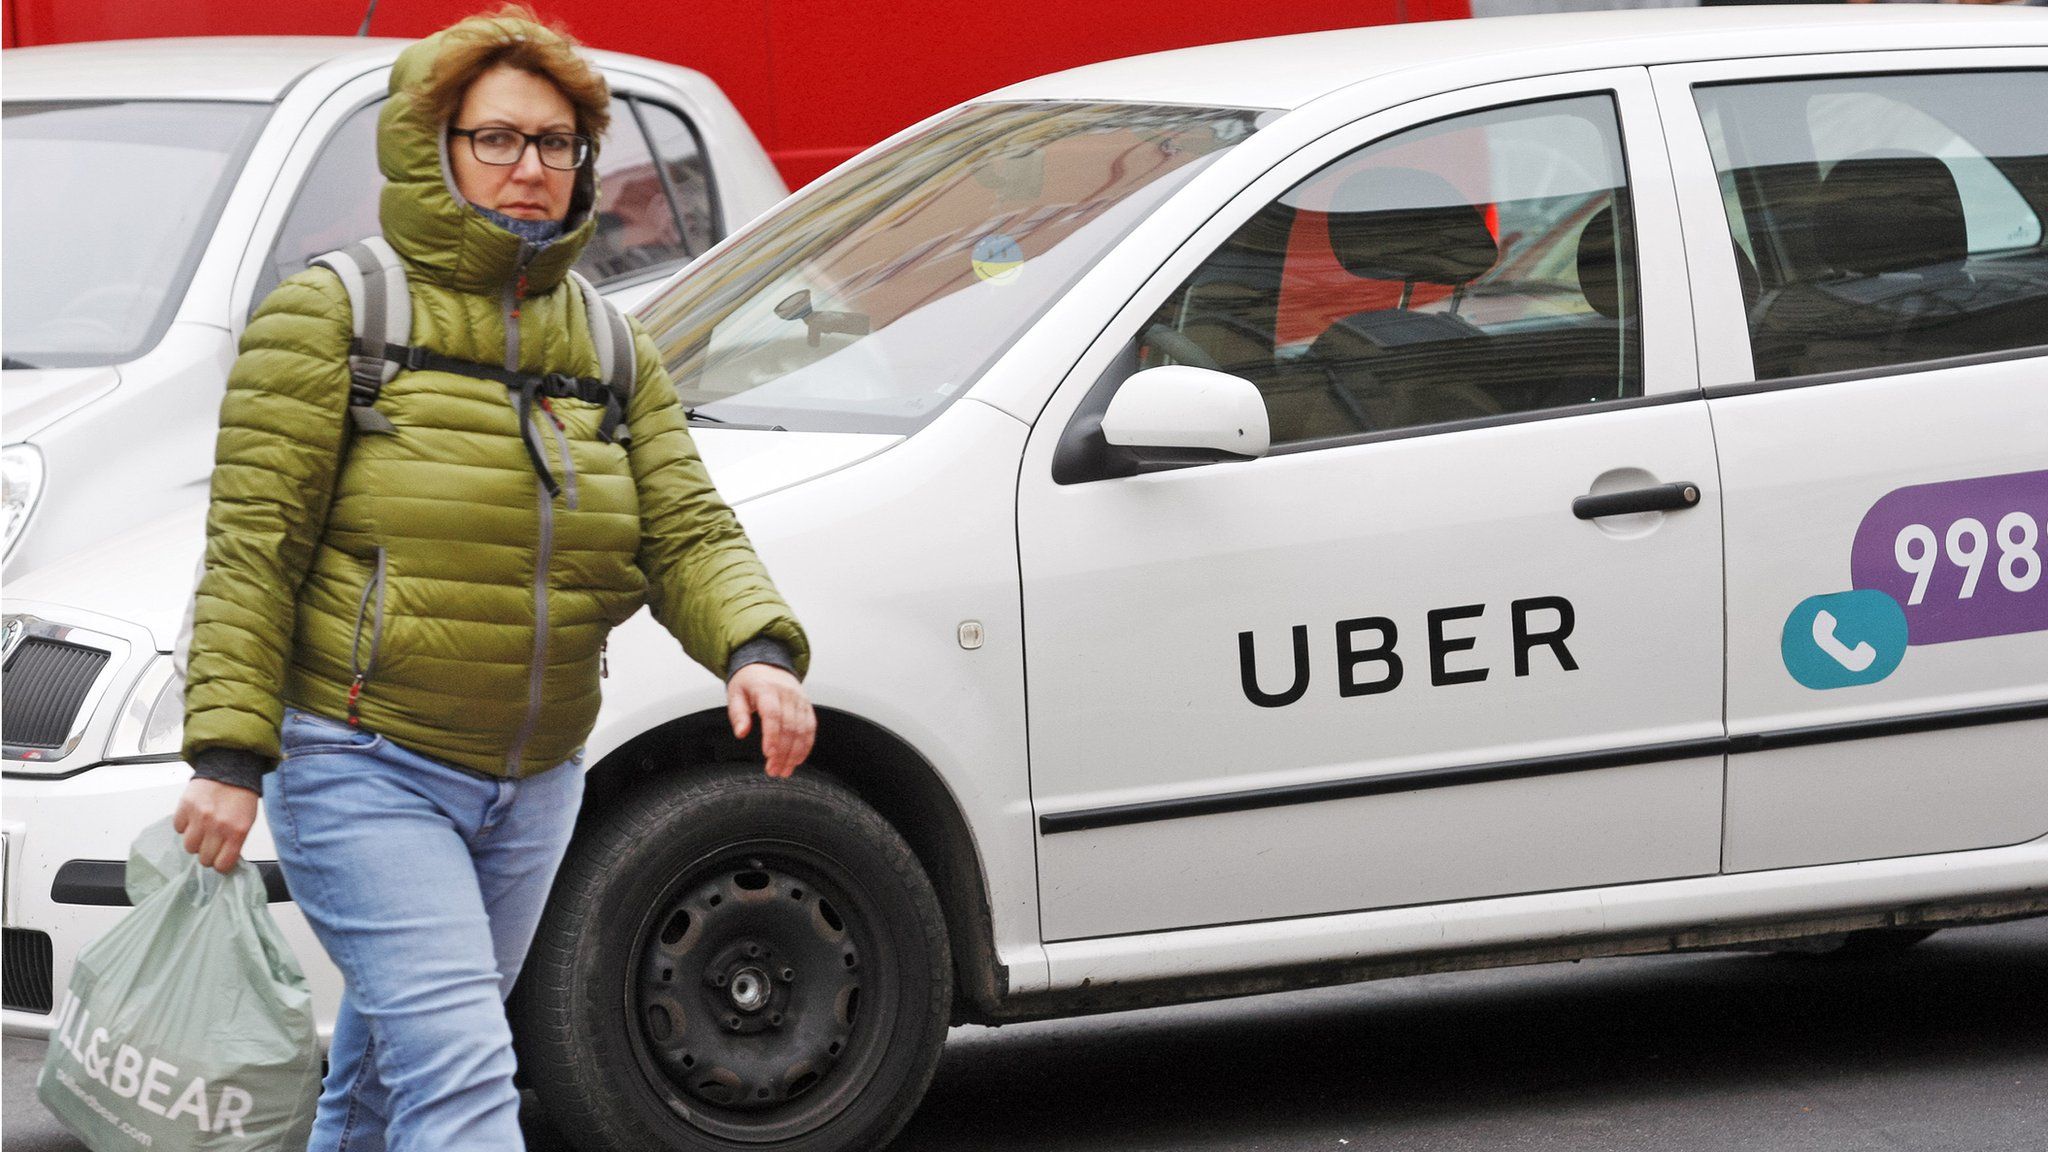 A woman seen walking next to a white car with a logo of Uber taxi cab company in Kiev, Ukraine.